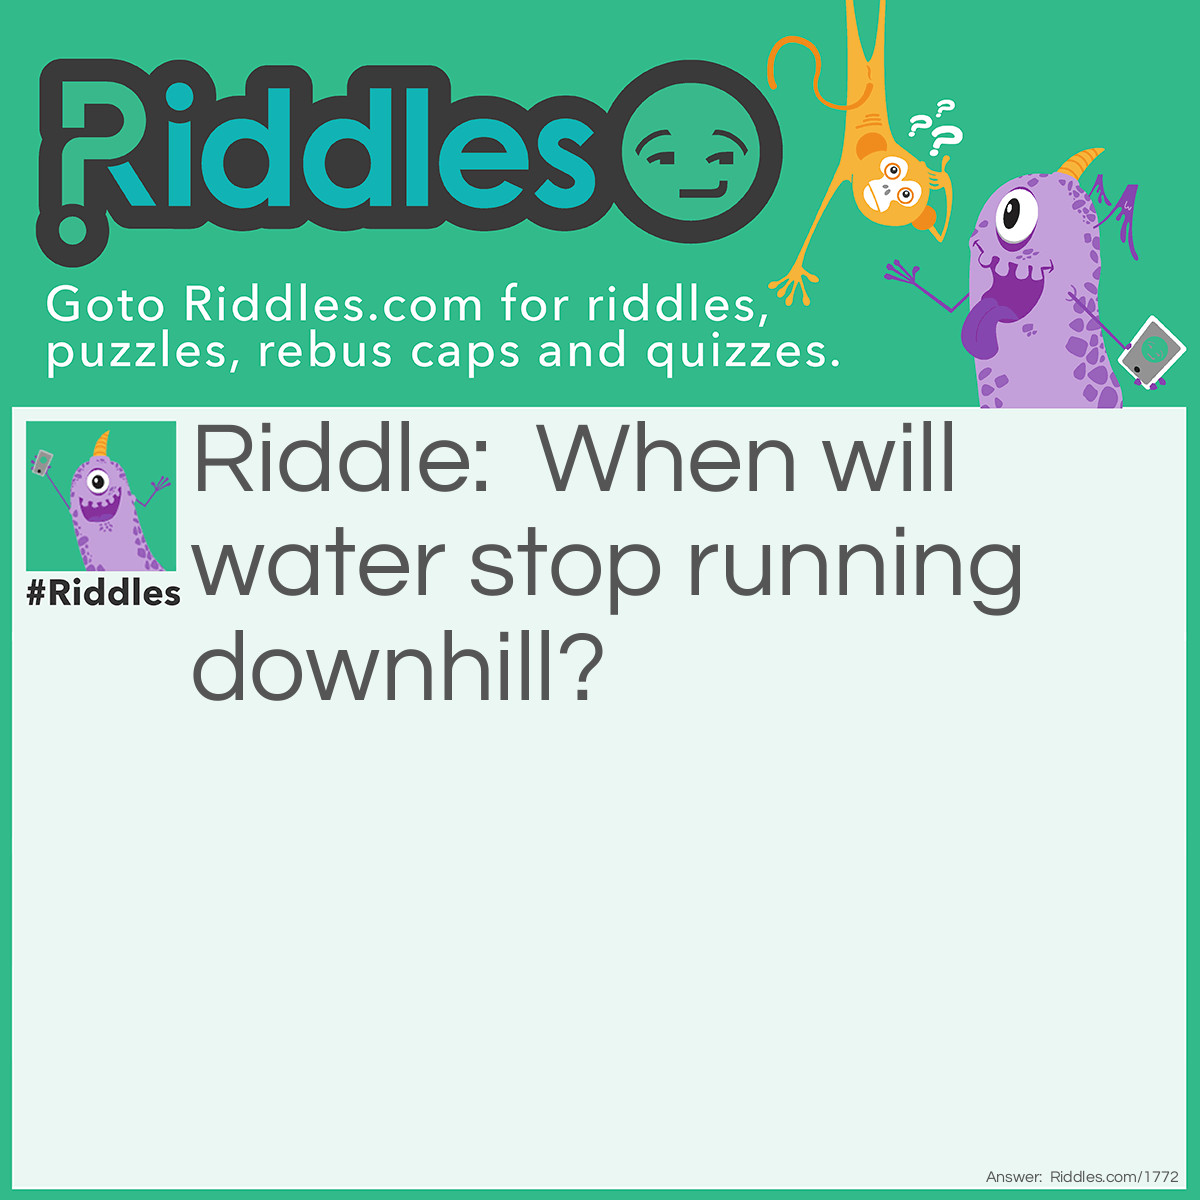 Riddle: When will water stop running downhill? Answer: When it reaches the bottom.